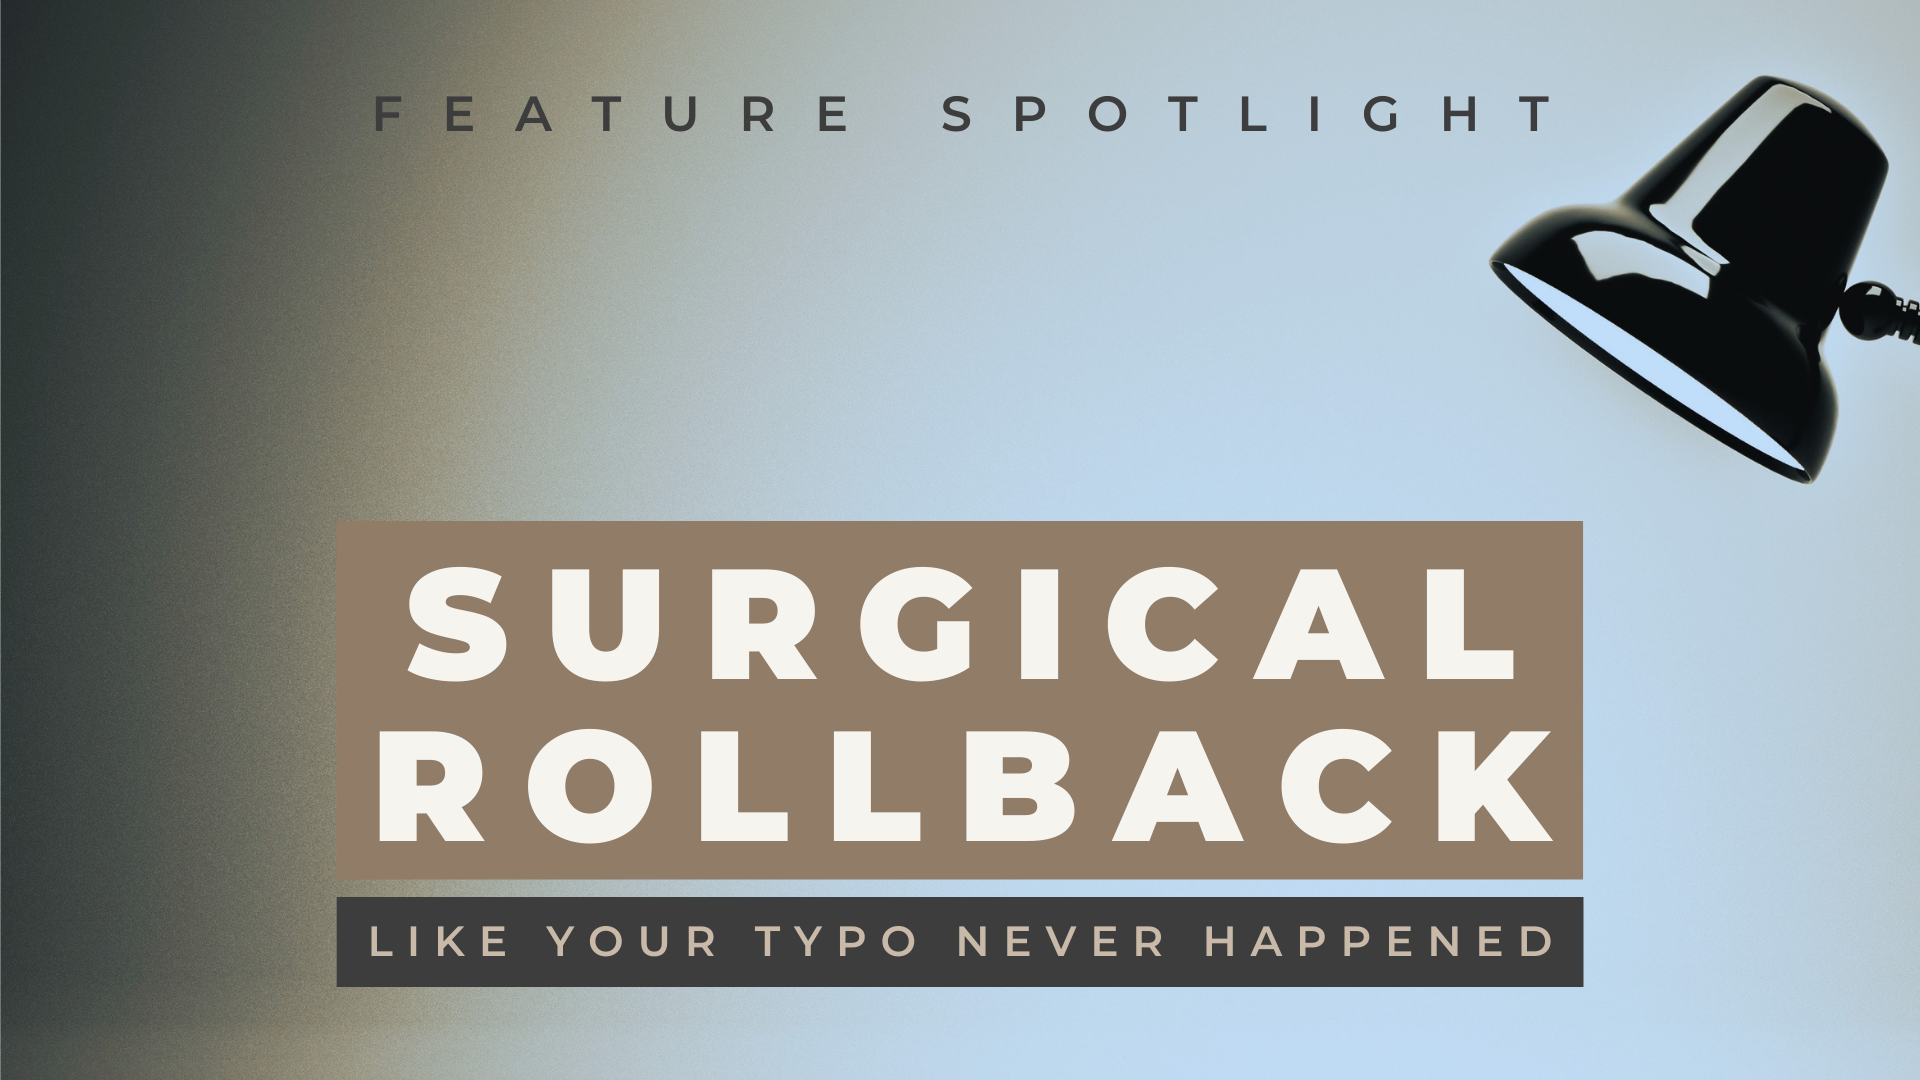 Feature Spotlight: Surgical Rollback